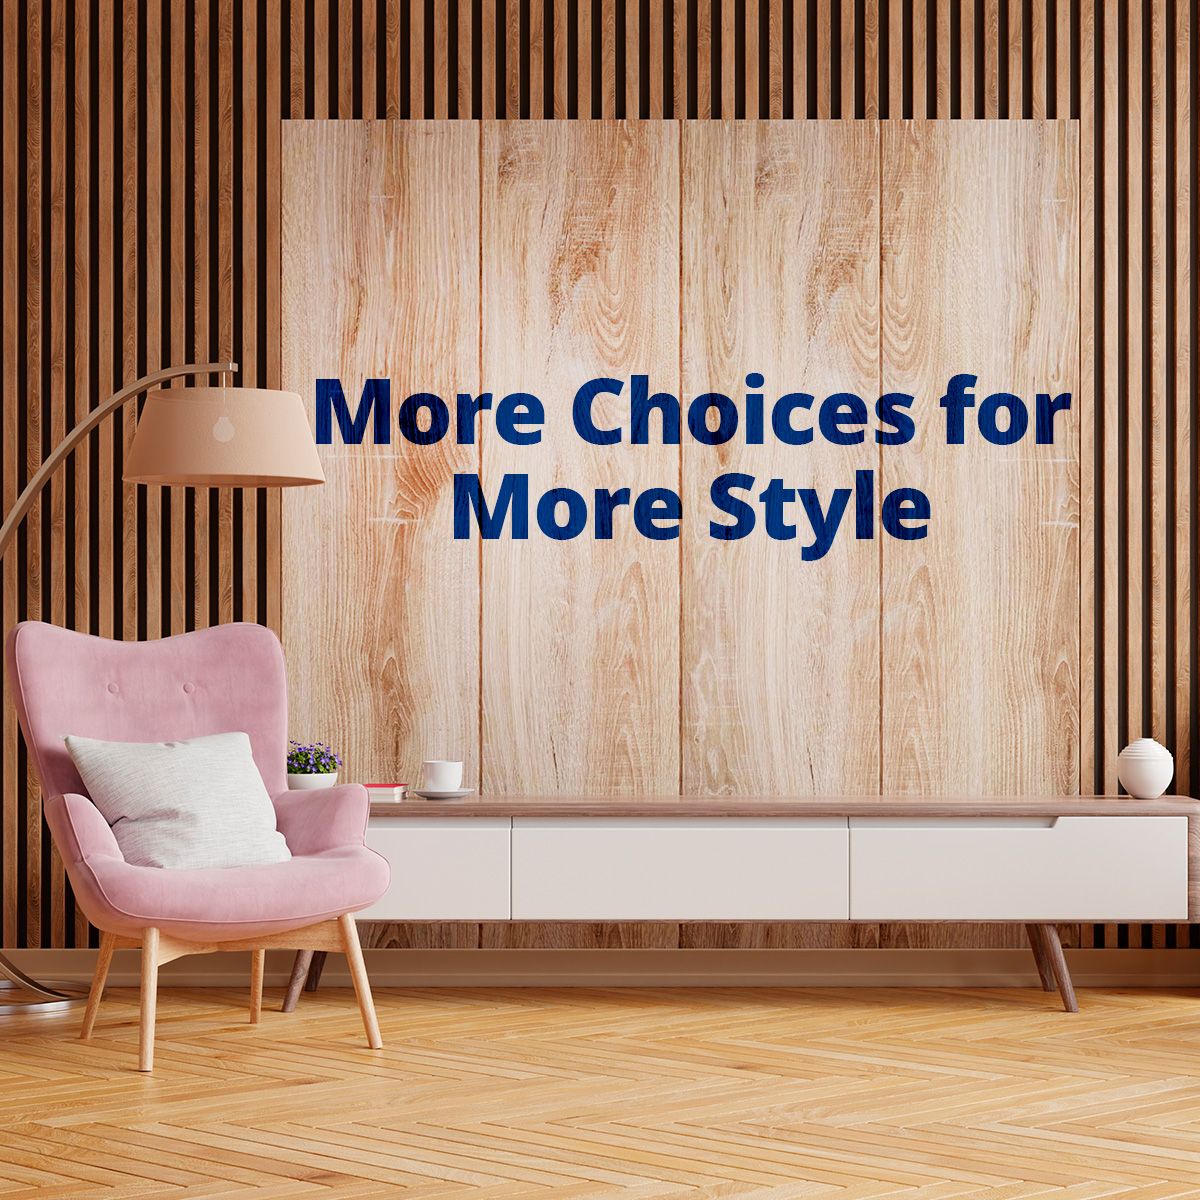 More Choices for More Style